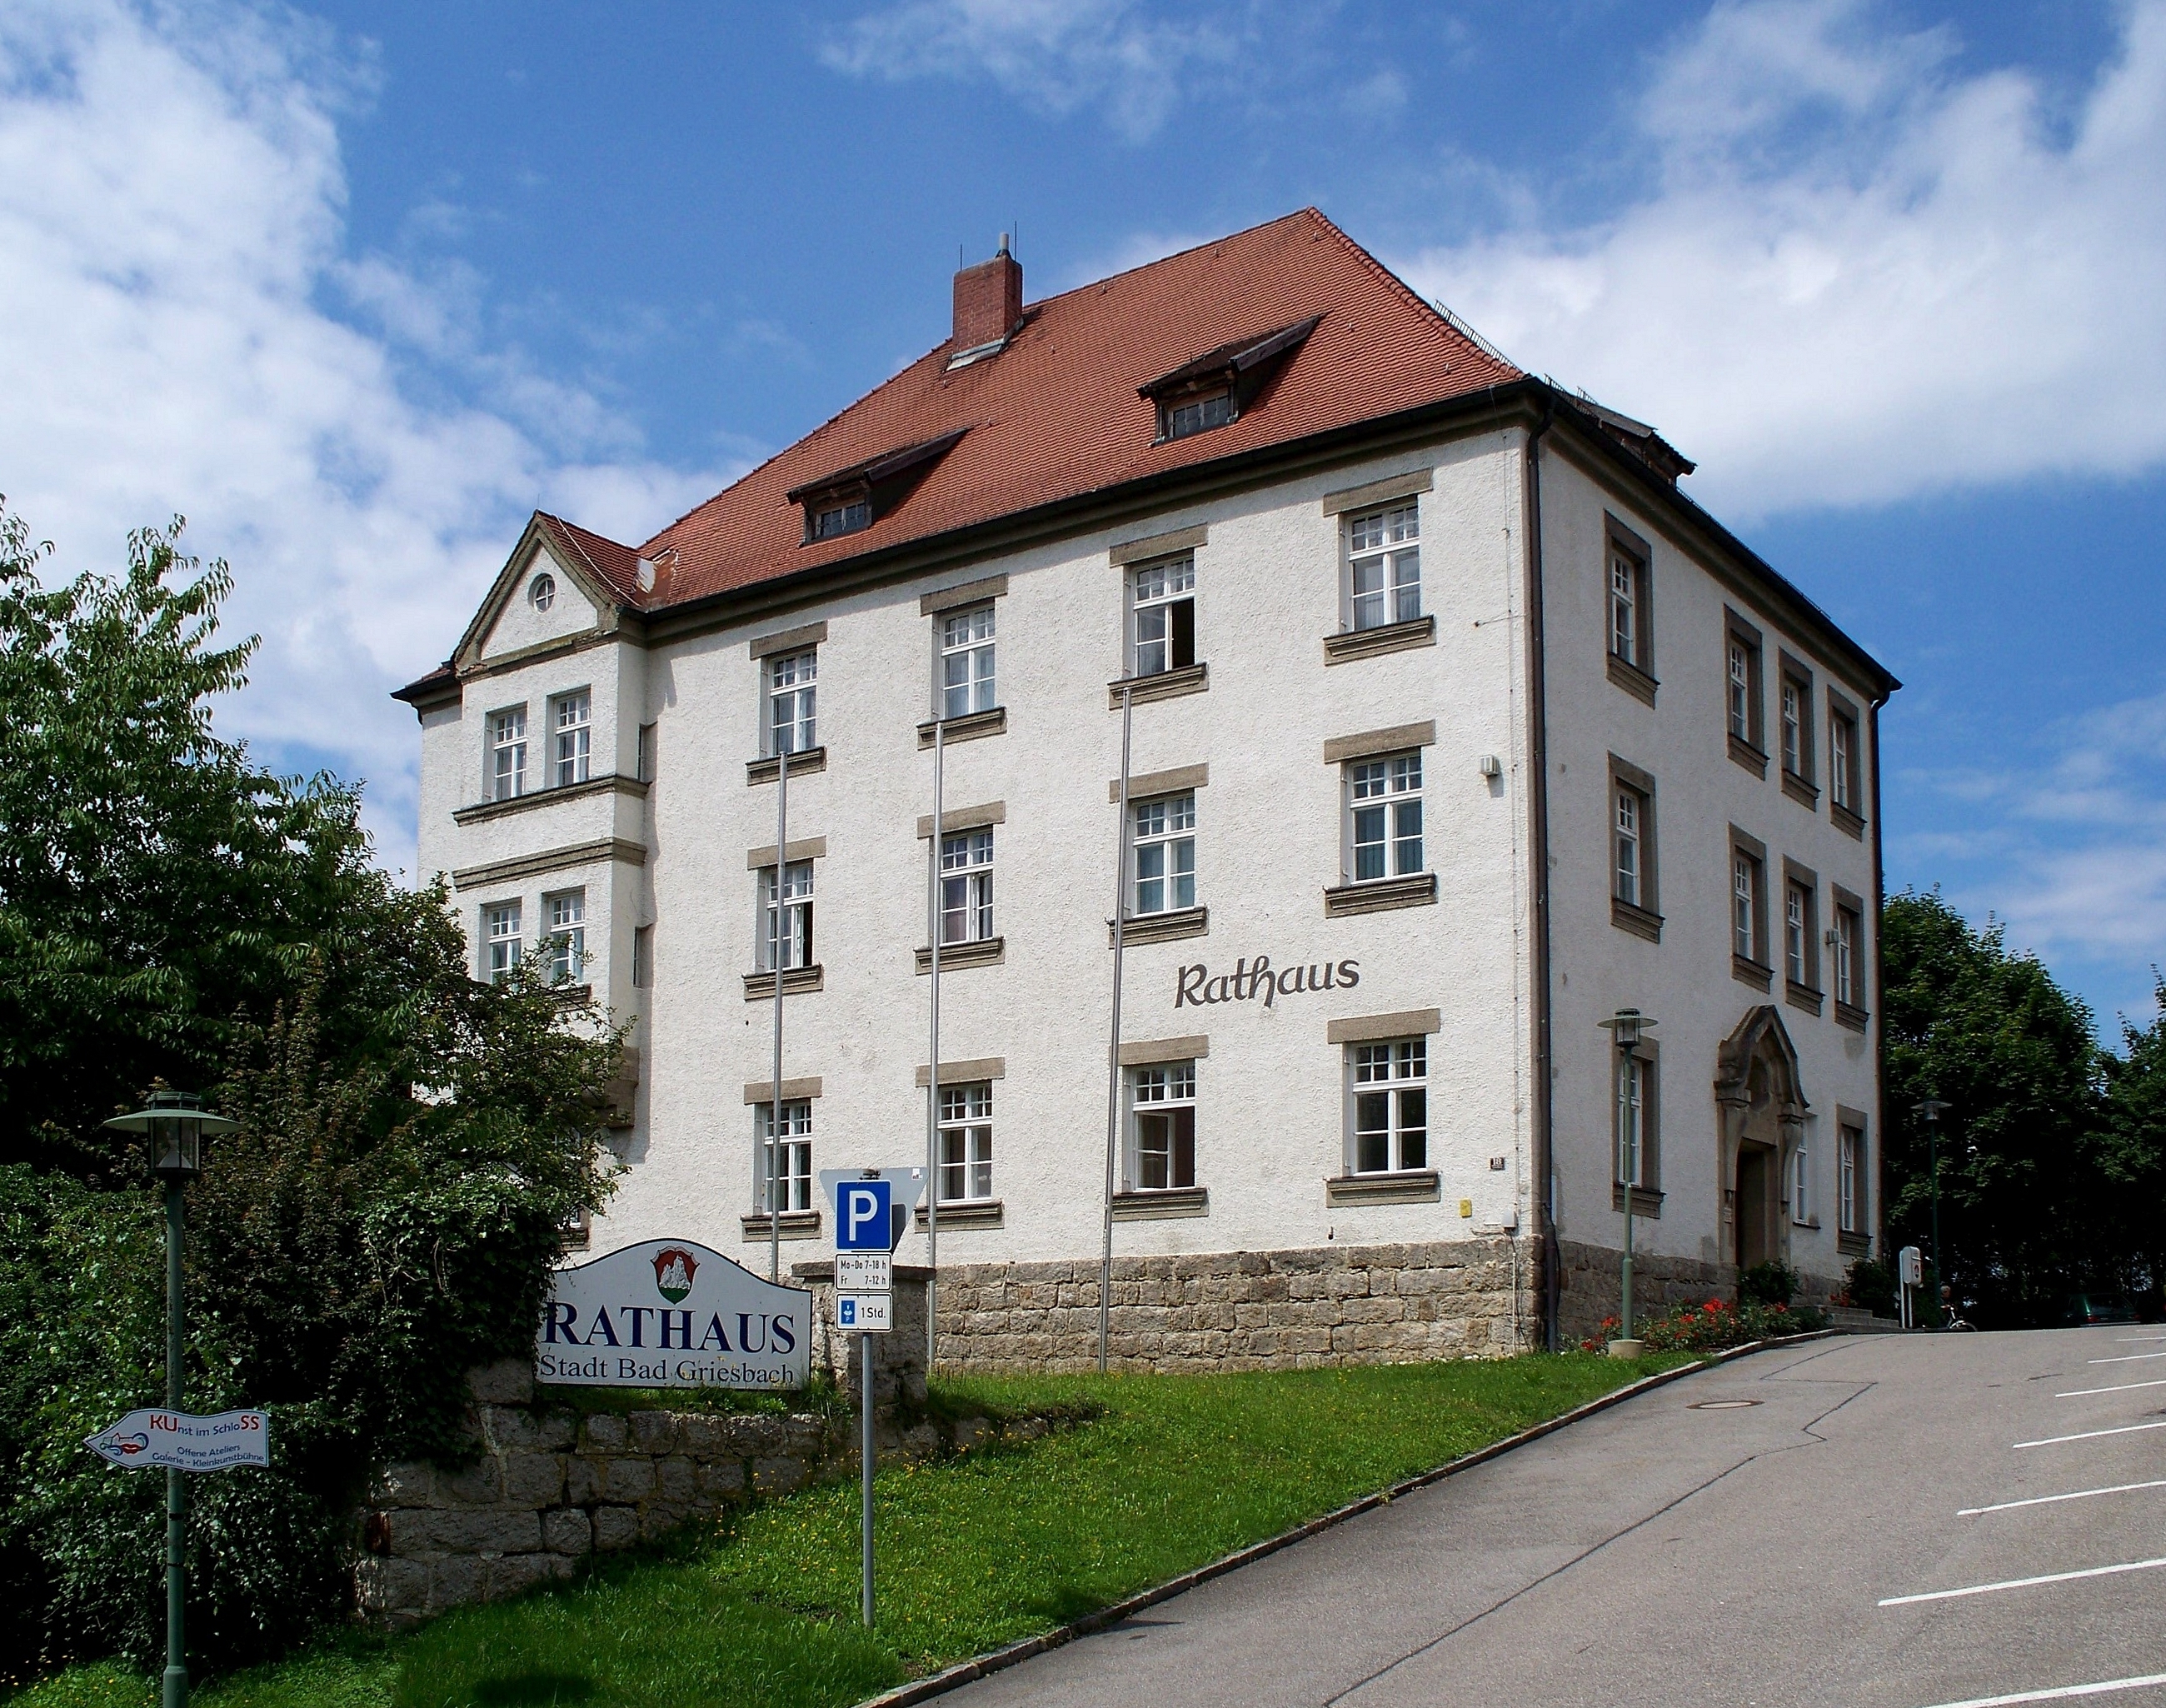 The town hall of Bad Griesbach im Rottal